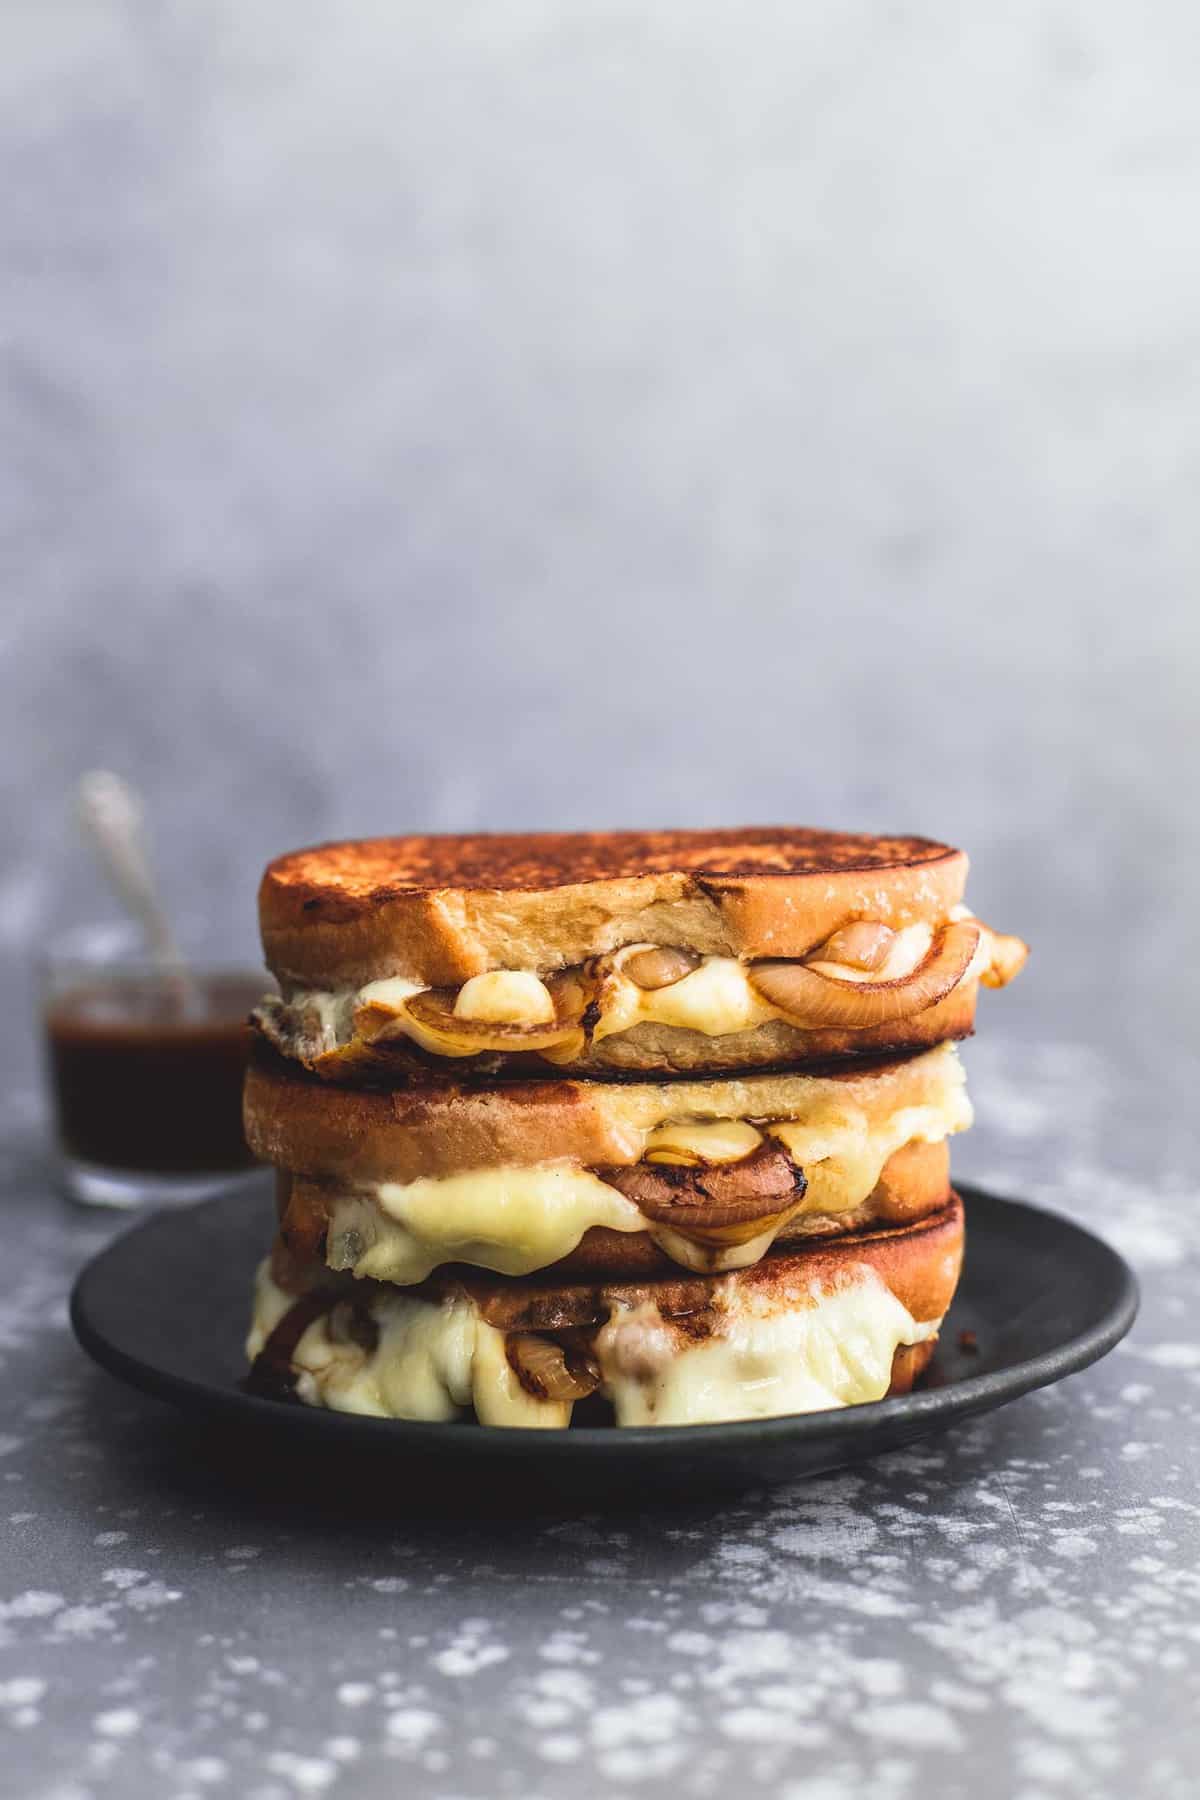 stacked French onion grilled cheese sandwiches on a plate.